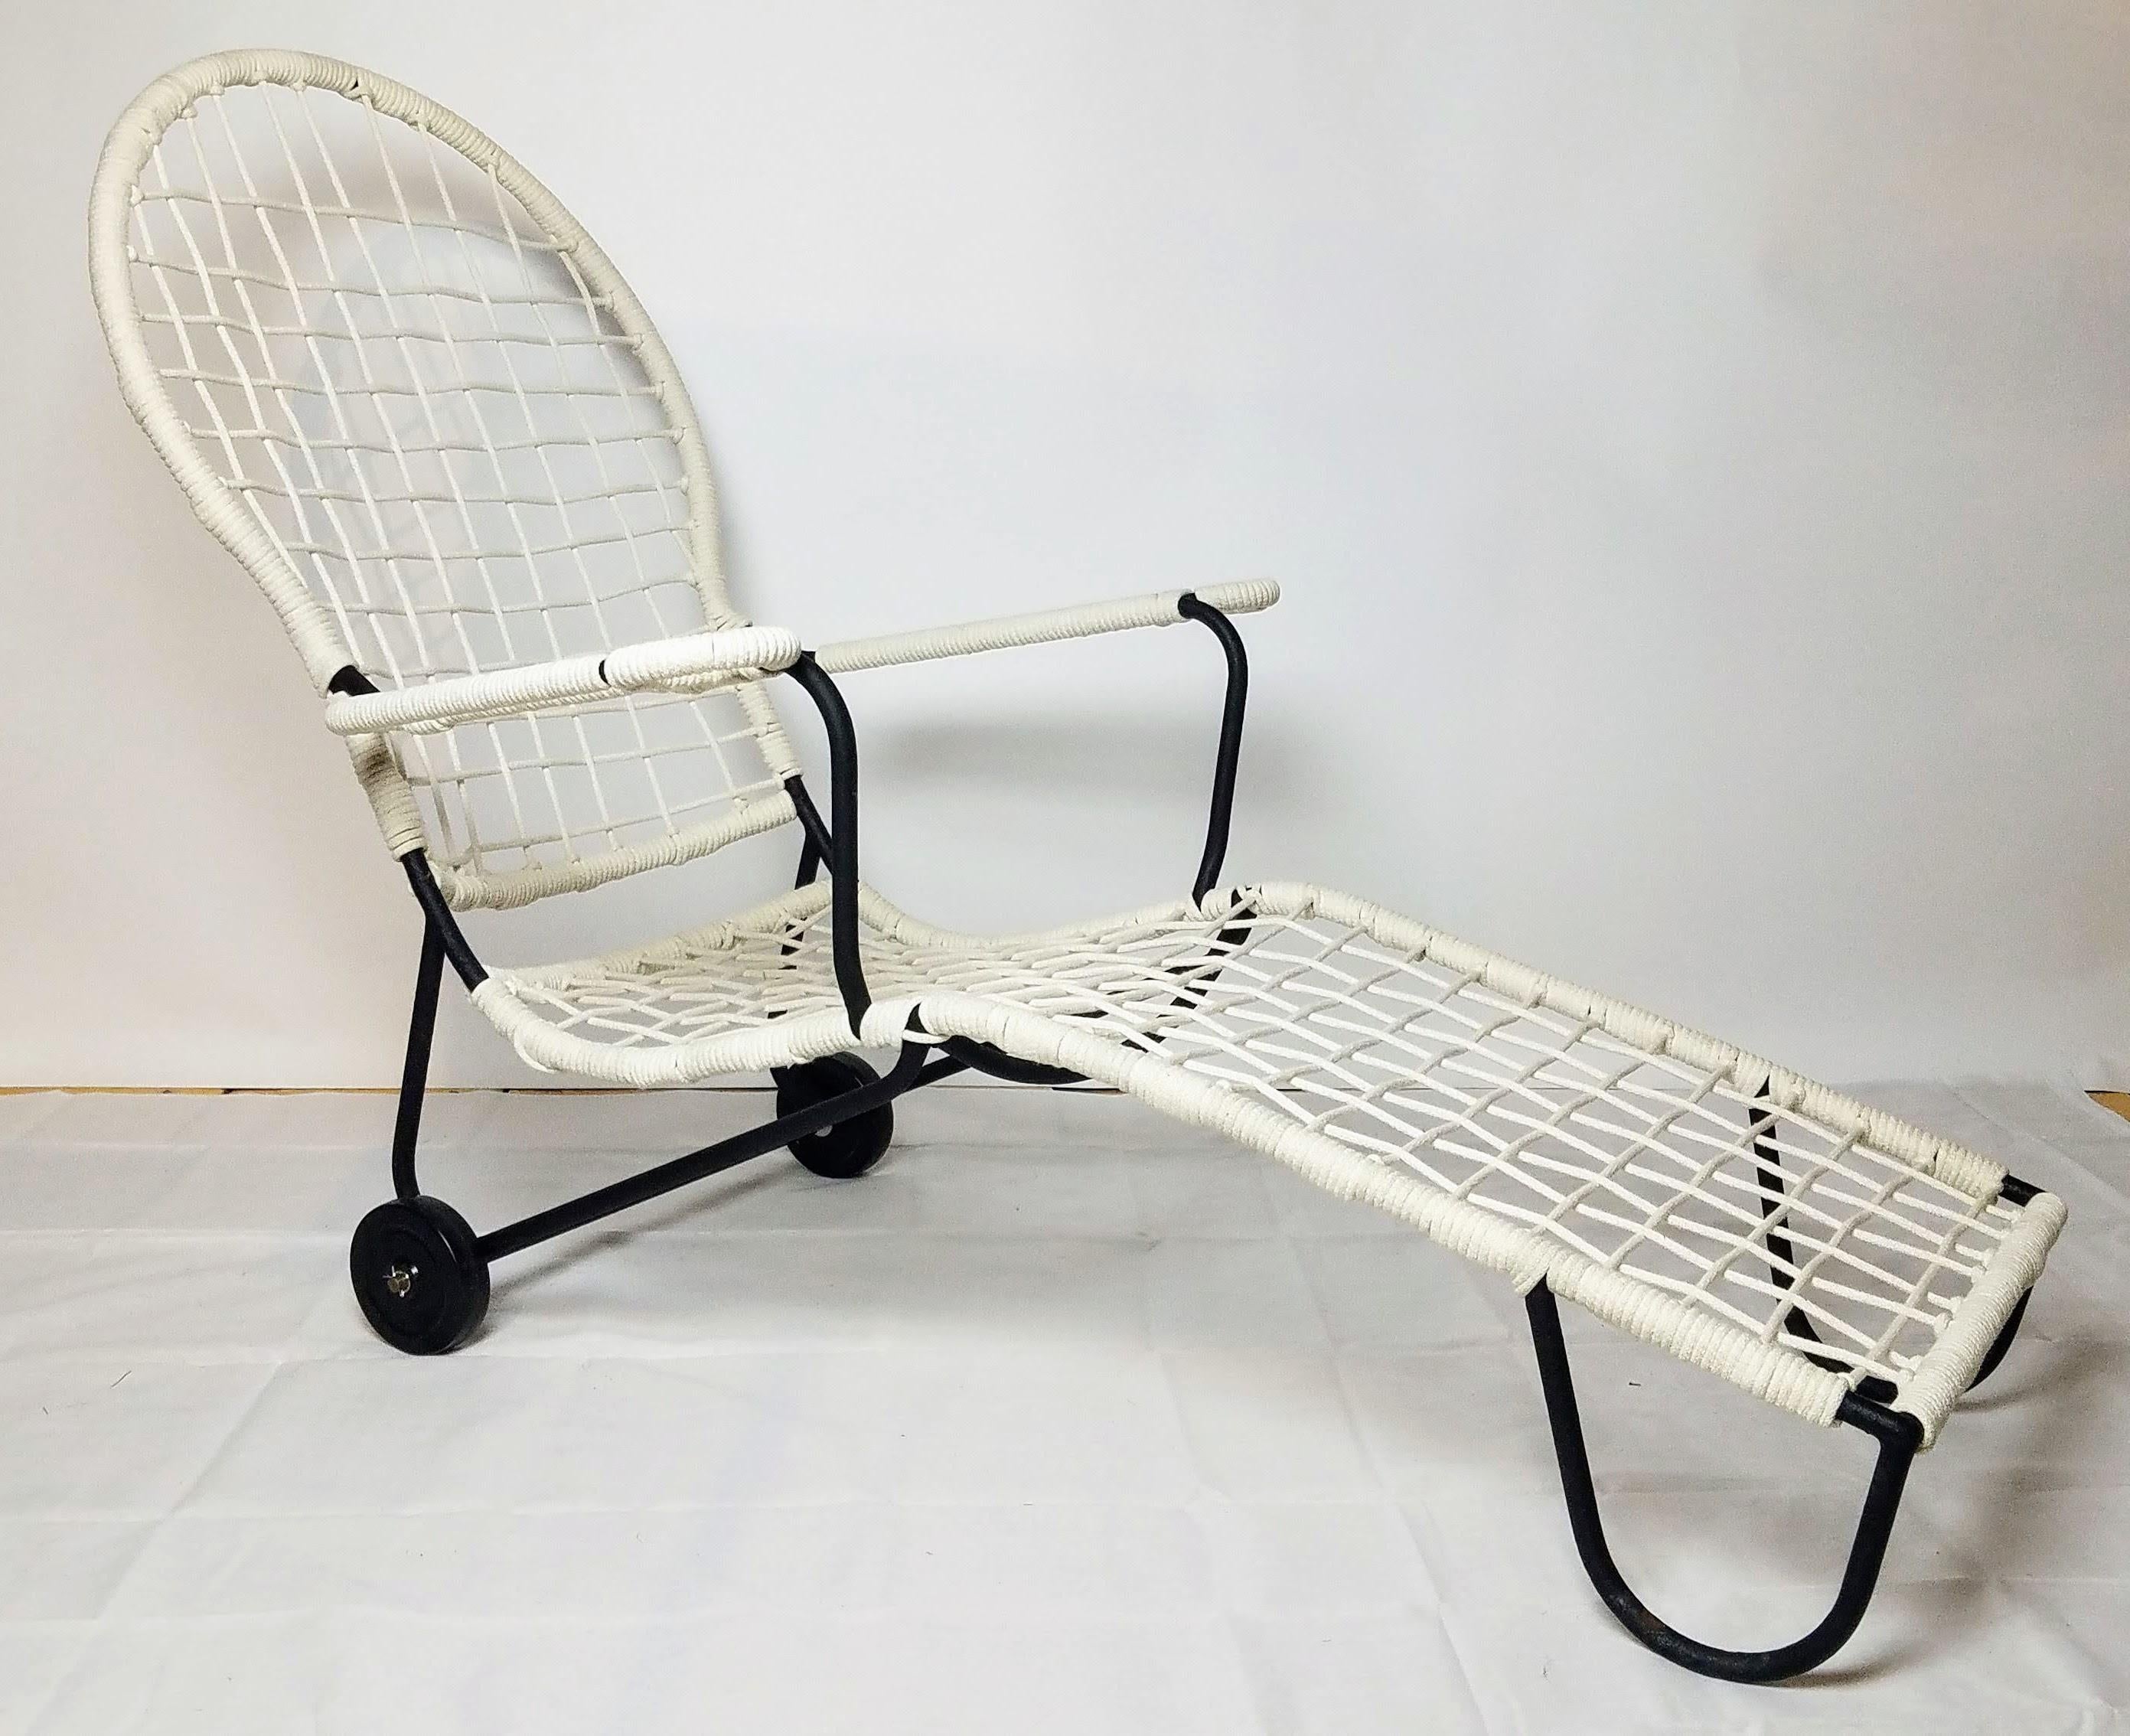 Cast Wylie R. Dallas Texas Roped Iron Furniture Chaise 1940s San Antonio Texas For Sale